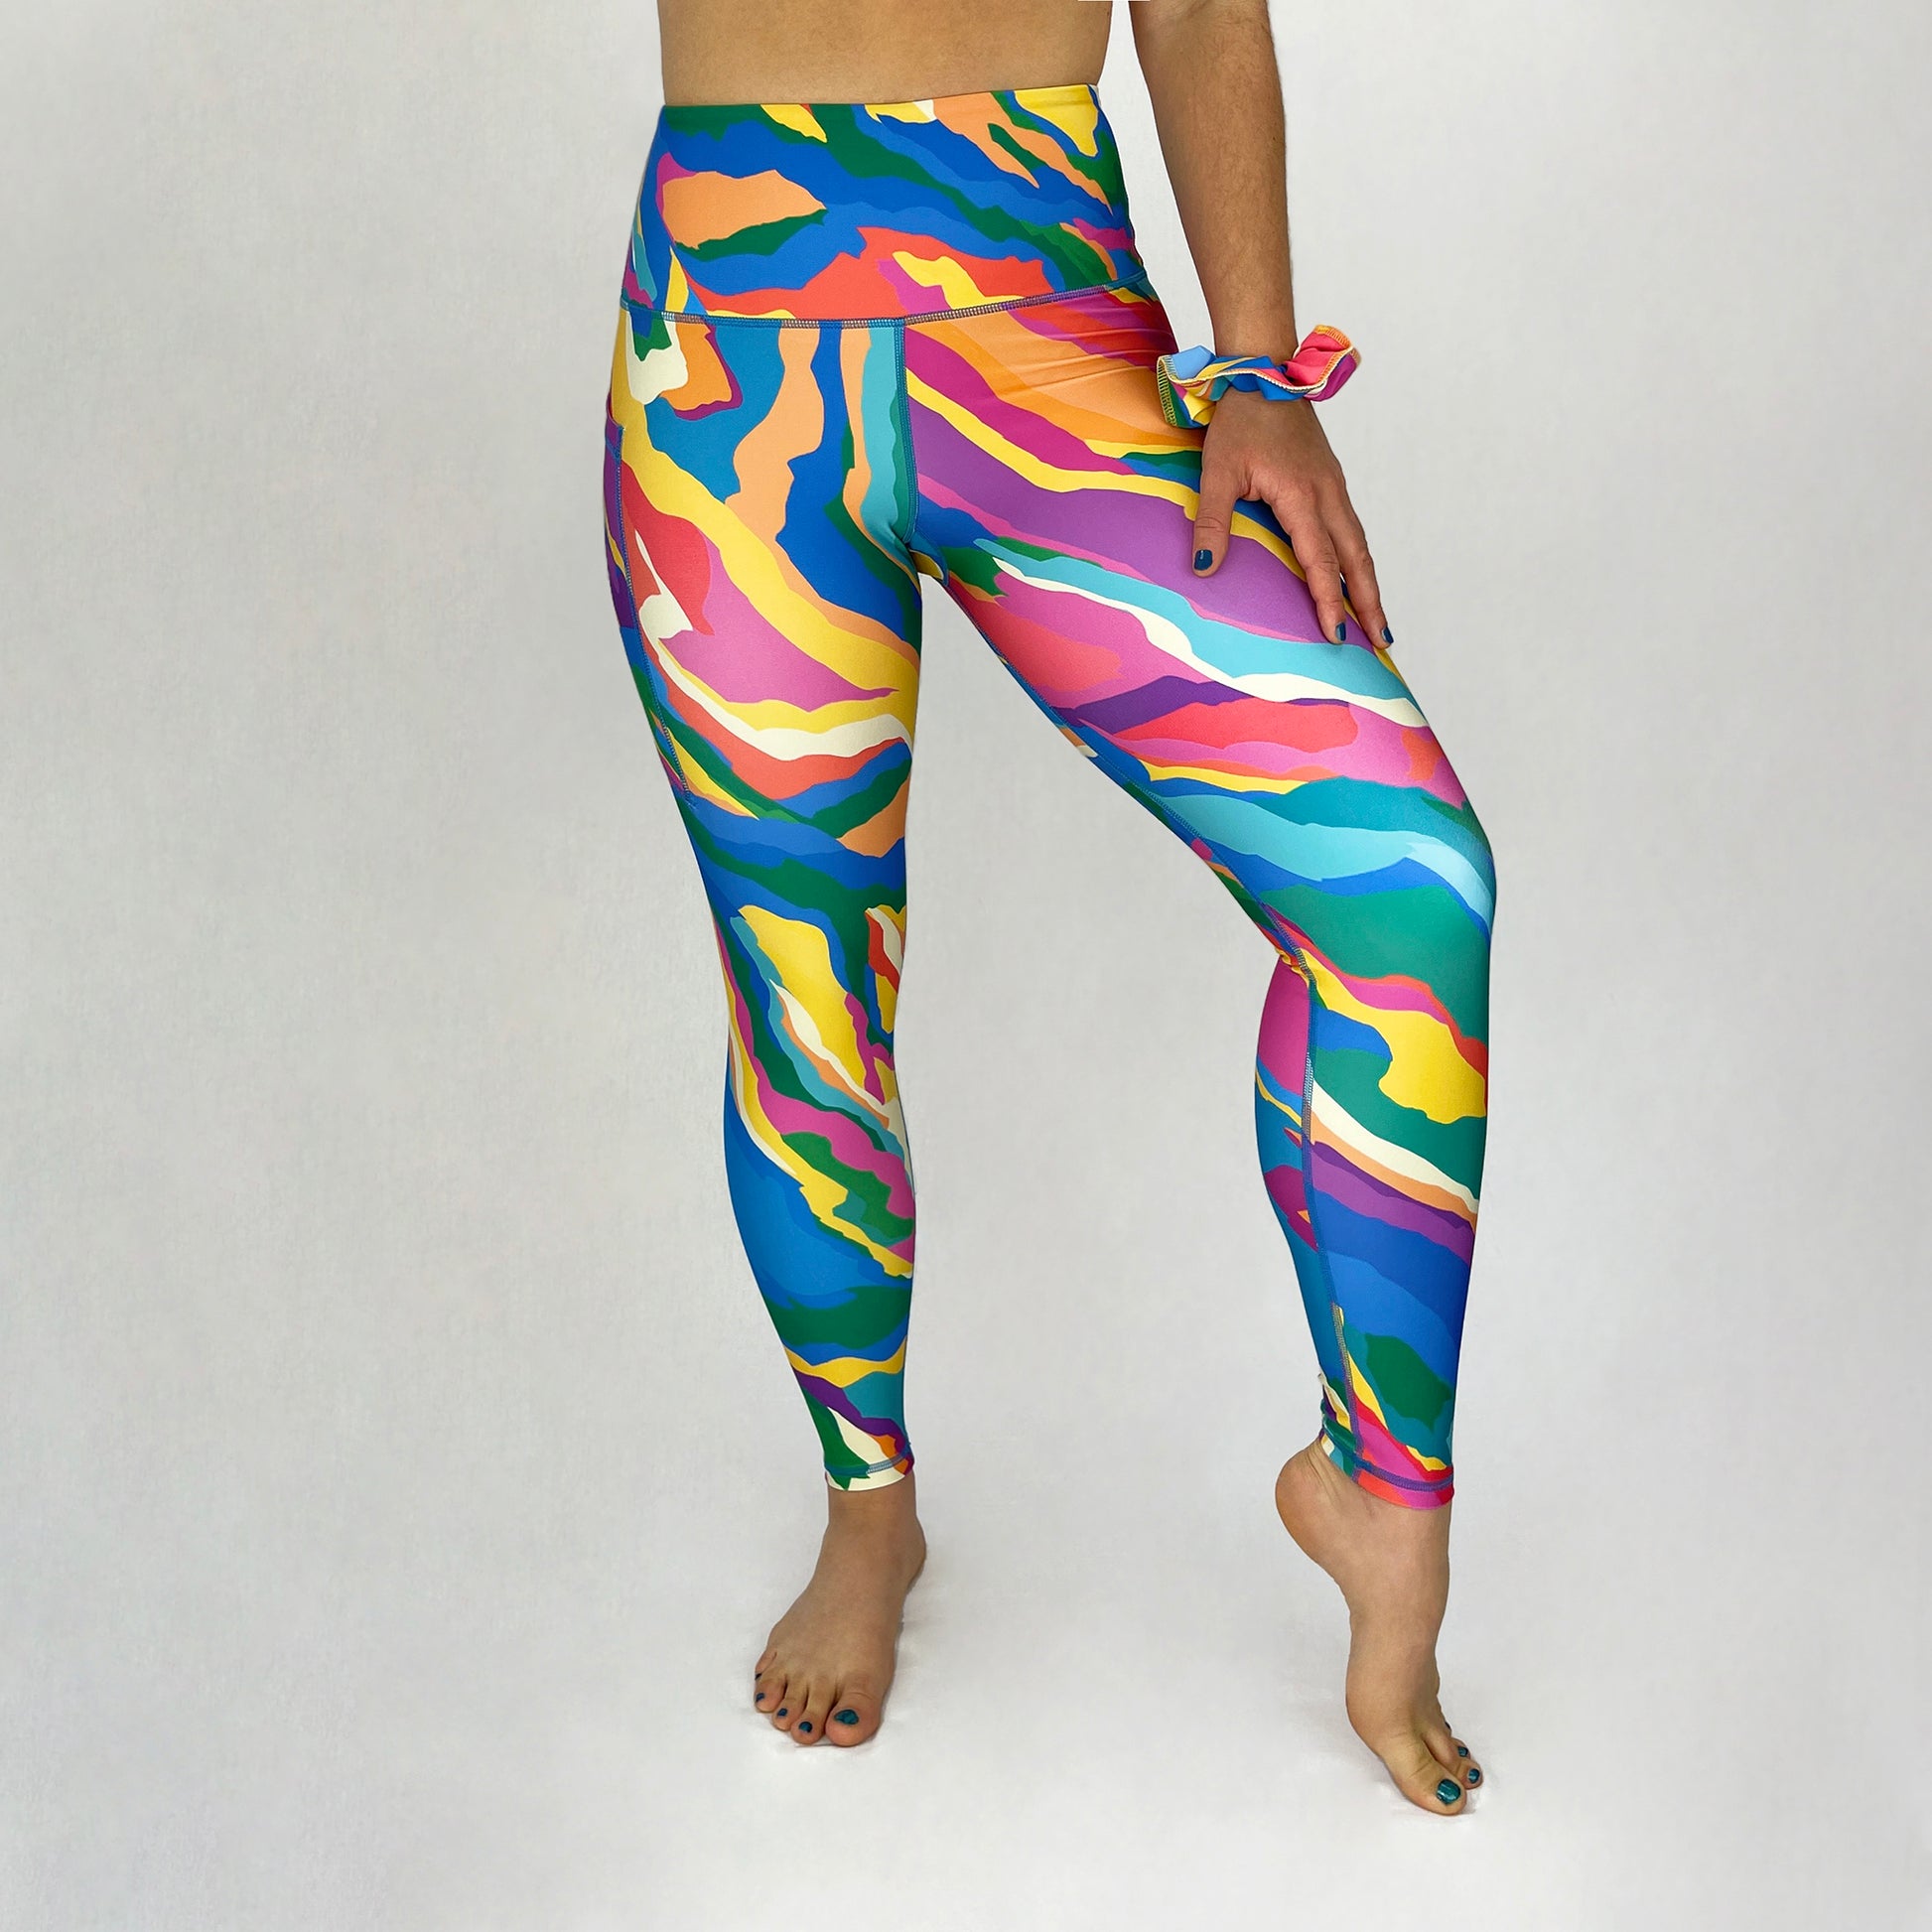 colourful full length leggings with pockets sustainably made with recycled materials - Rainbow - front